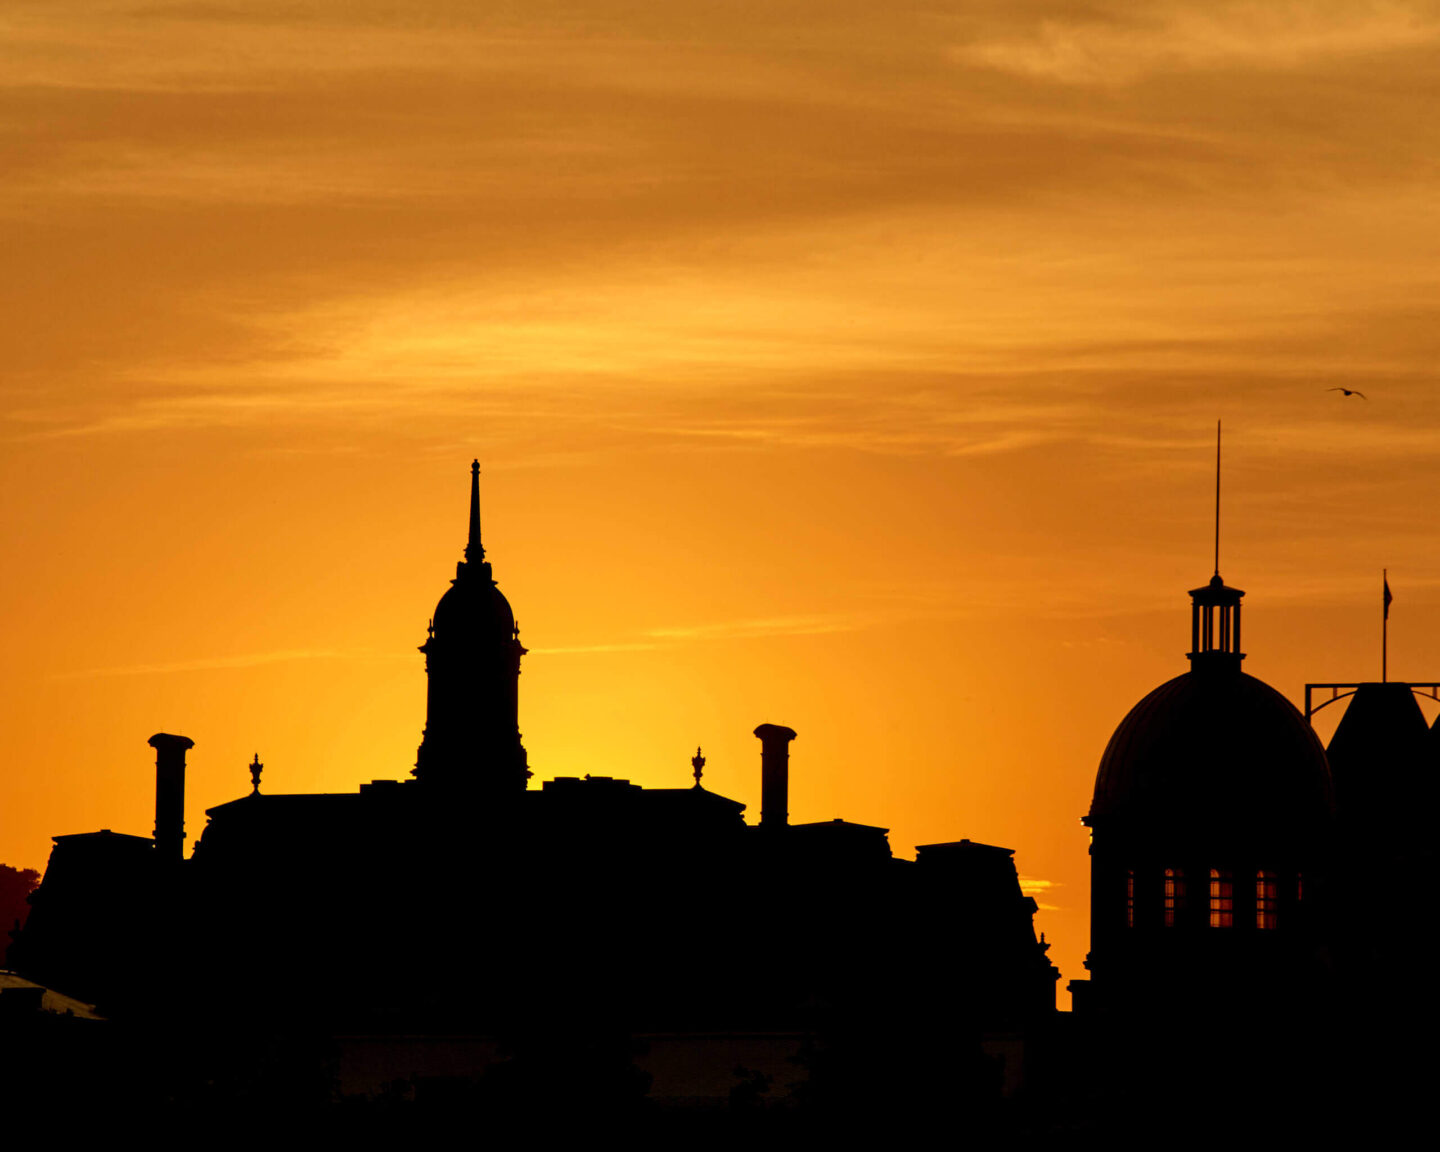 Canon 5D Mark iii with ef 50mm 1.8 - Sunset at the Bonsecours Market in the Old Port of Montreal